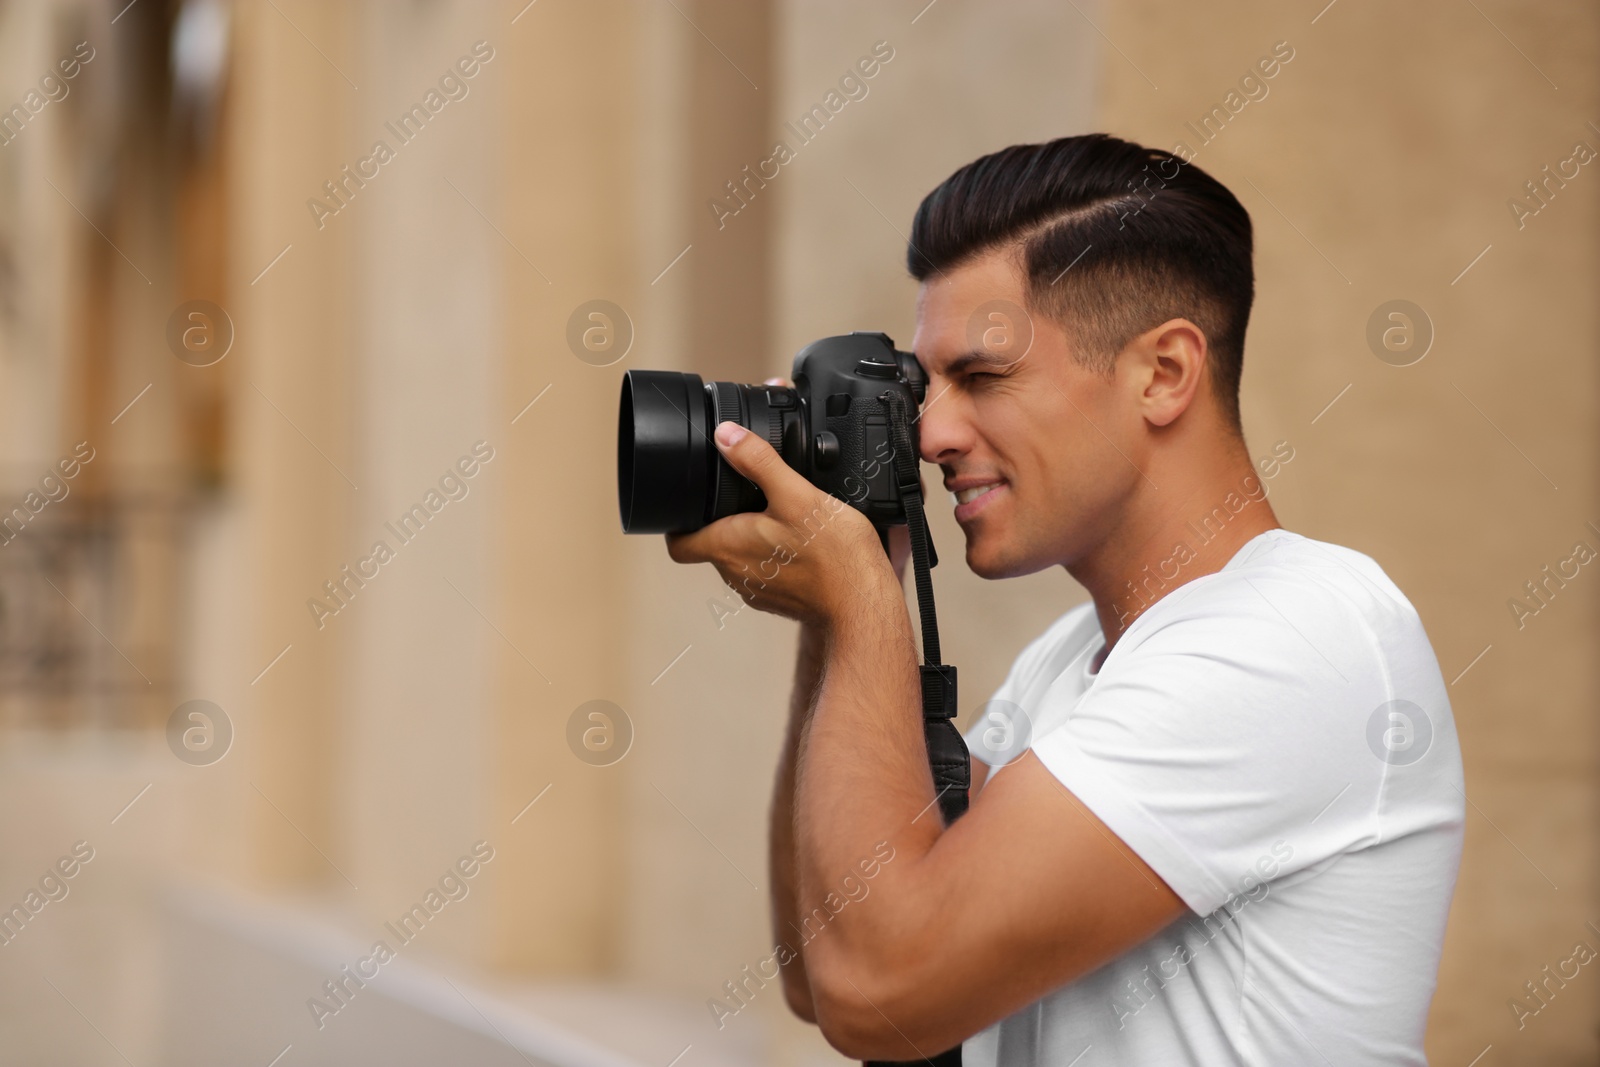 Photo of Photographer taking picture with professional camera on city street